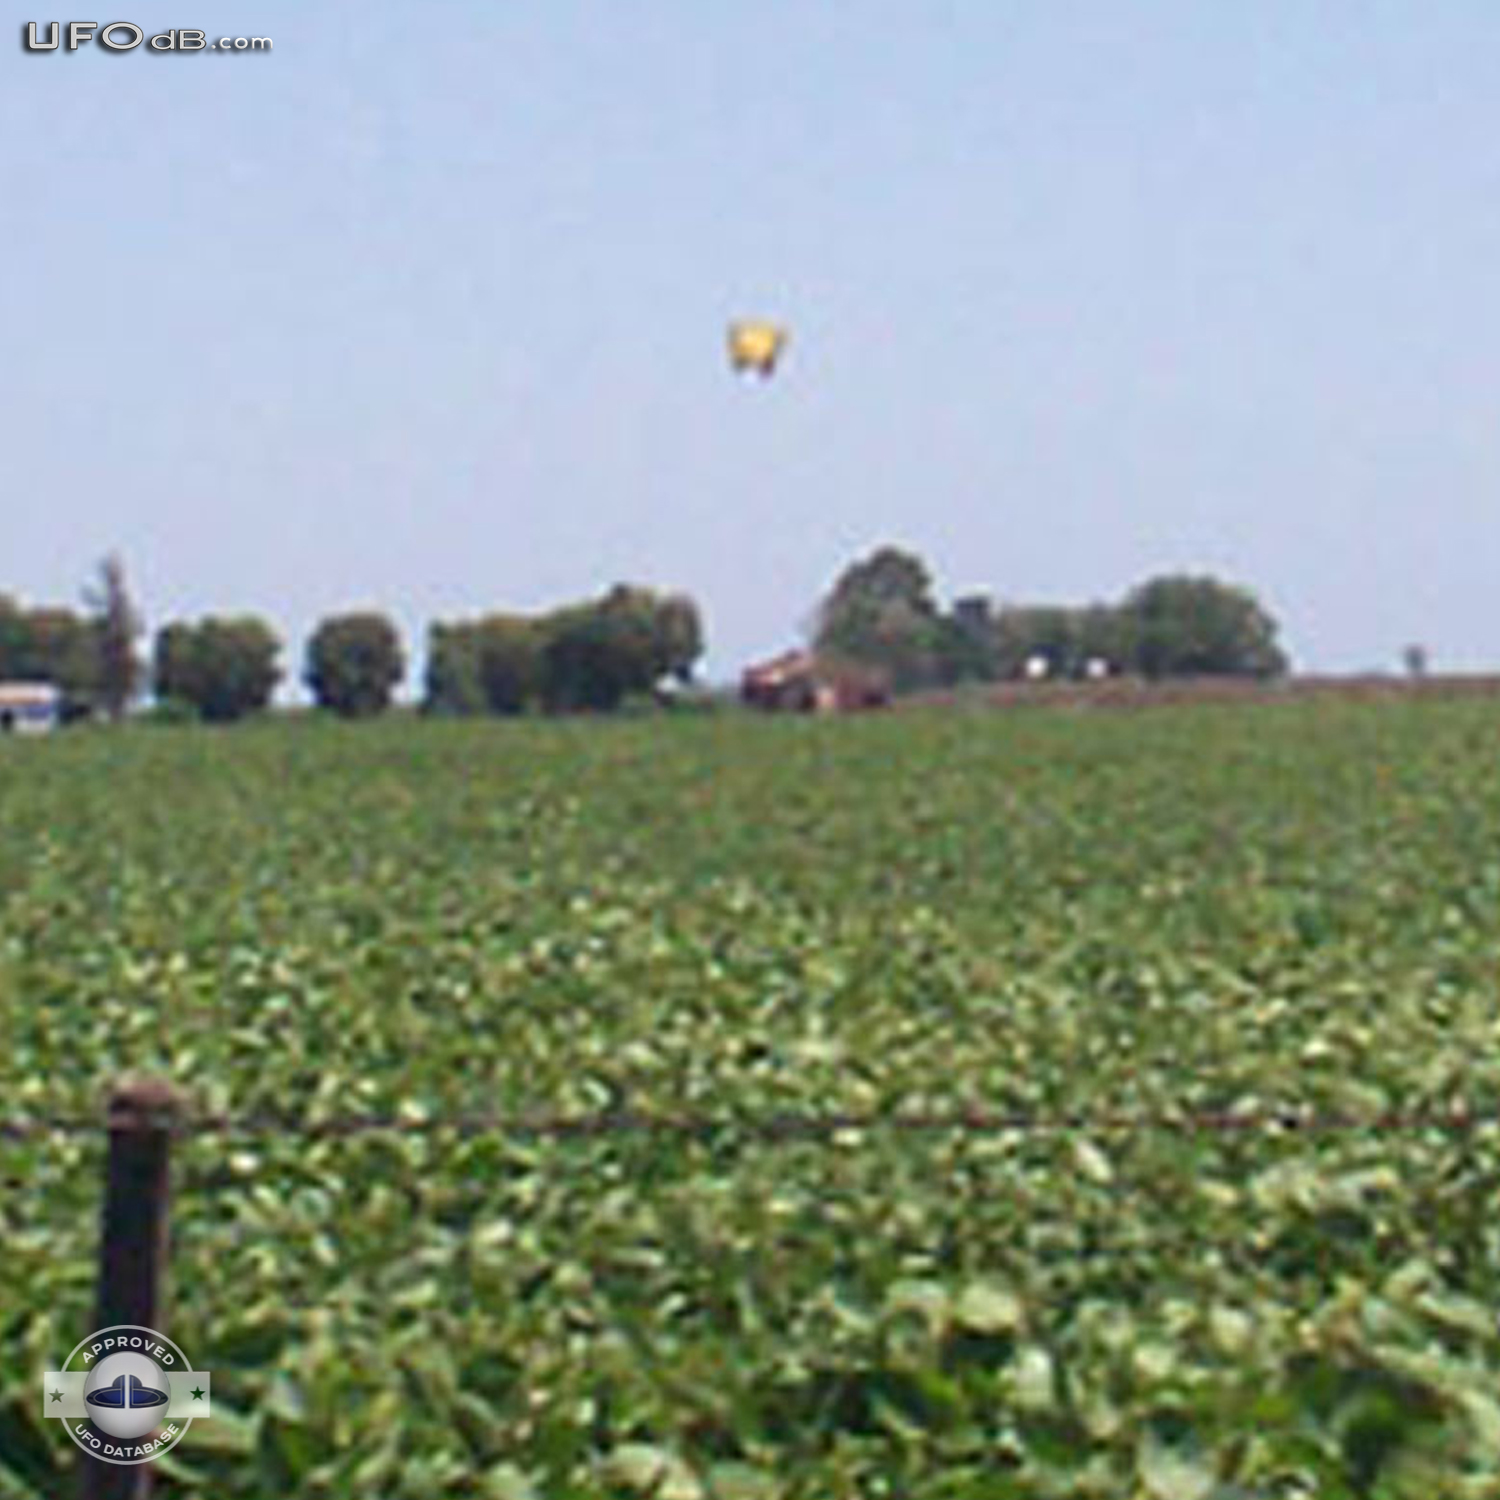 Family in Argentina blames a UFO for their sickness | February 28 2011 UFO Picture #271-3